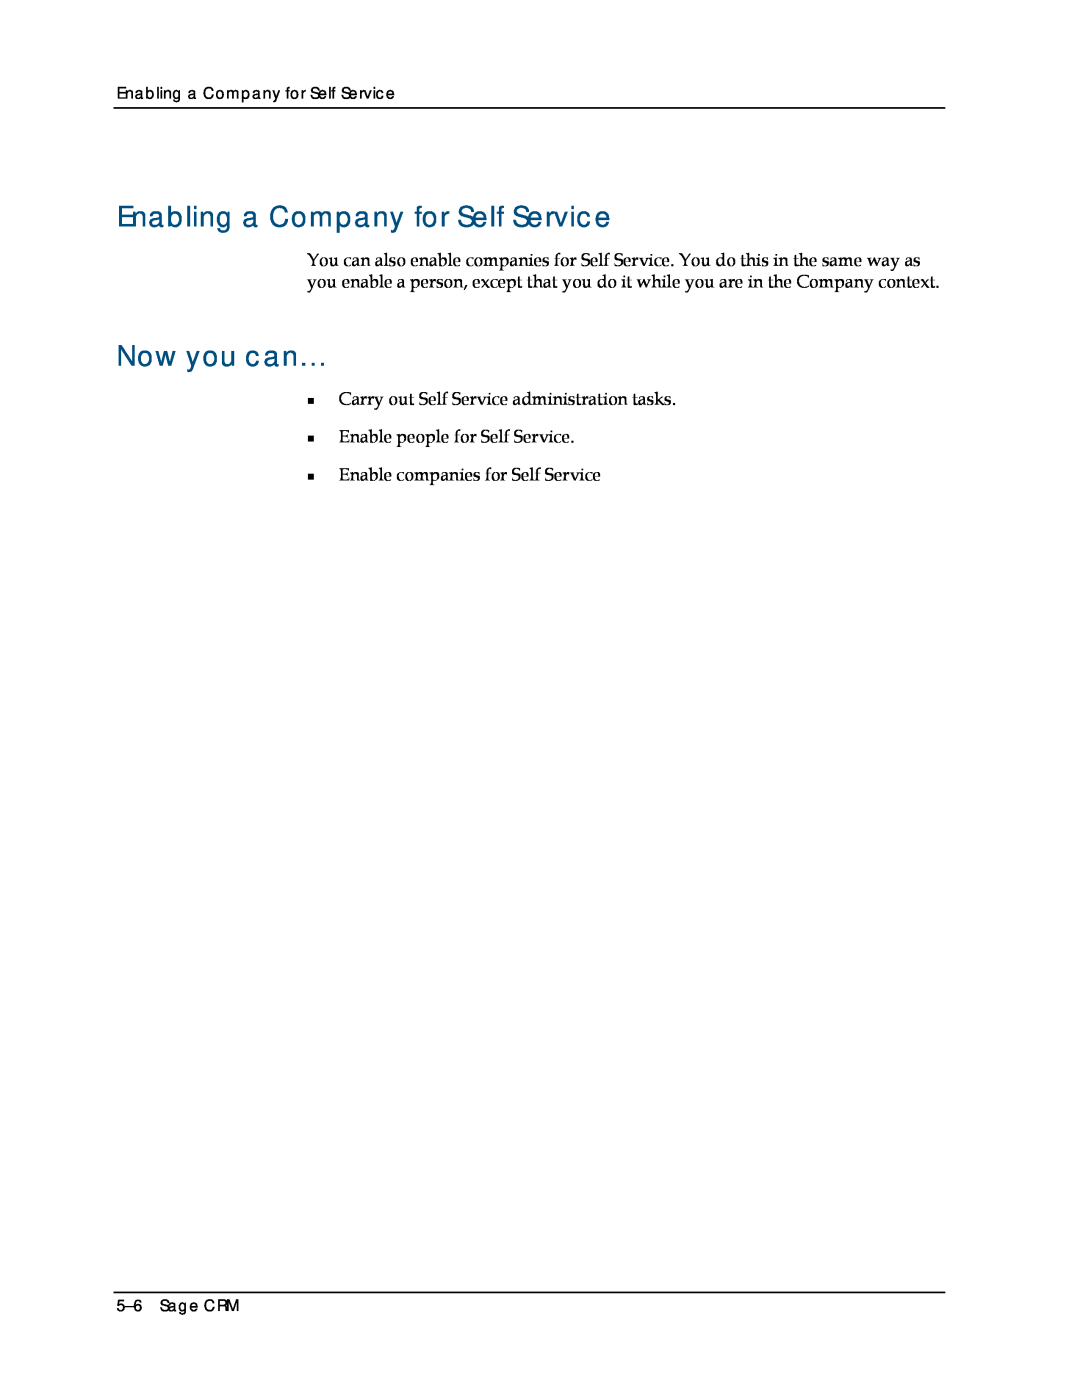 Sage Software 5.8 manual Enabling a Company for Self Service, Now you can…, 5-6Sage CRM, „ „ „ 